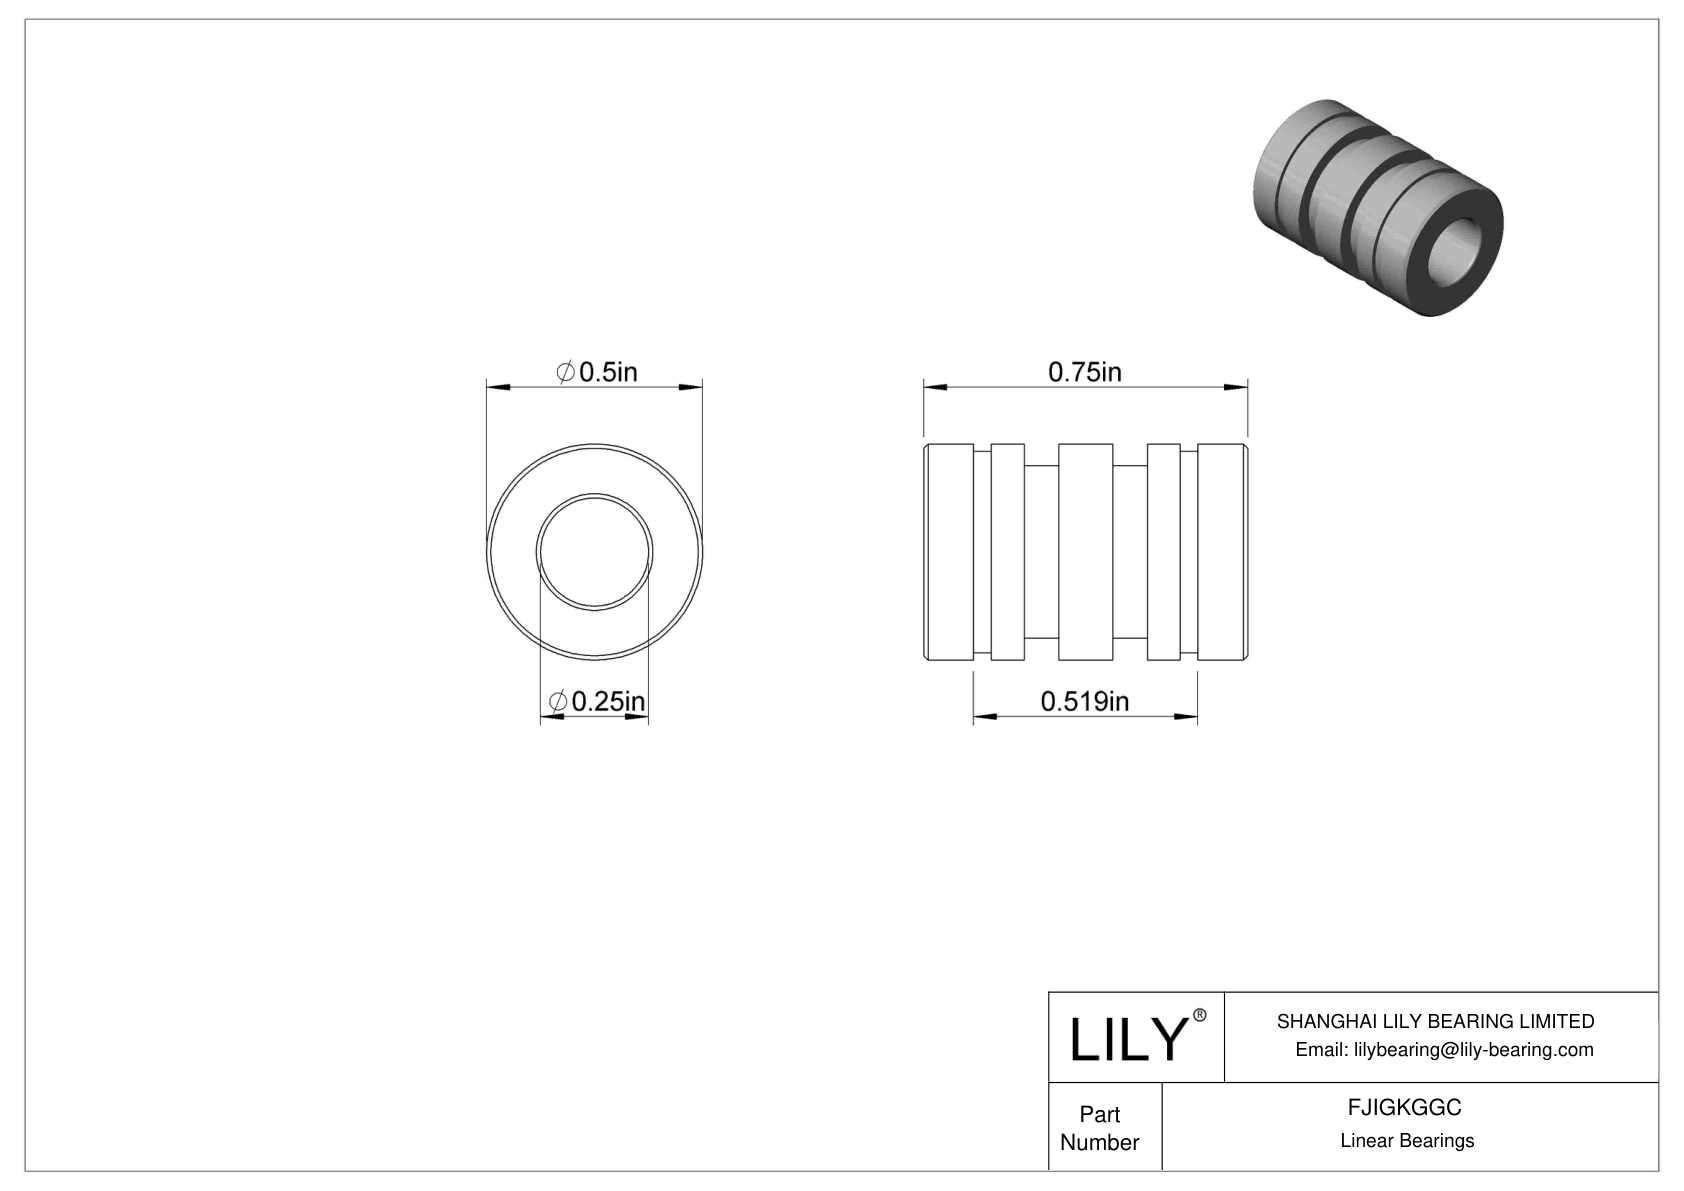 FJIGKGGC Common Linear Sleeve Bearings cad drawing